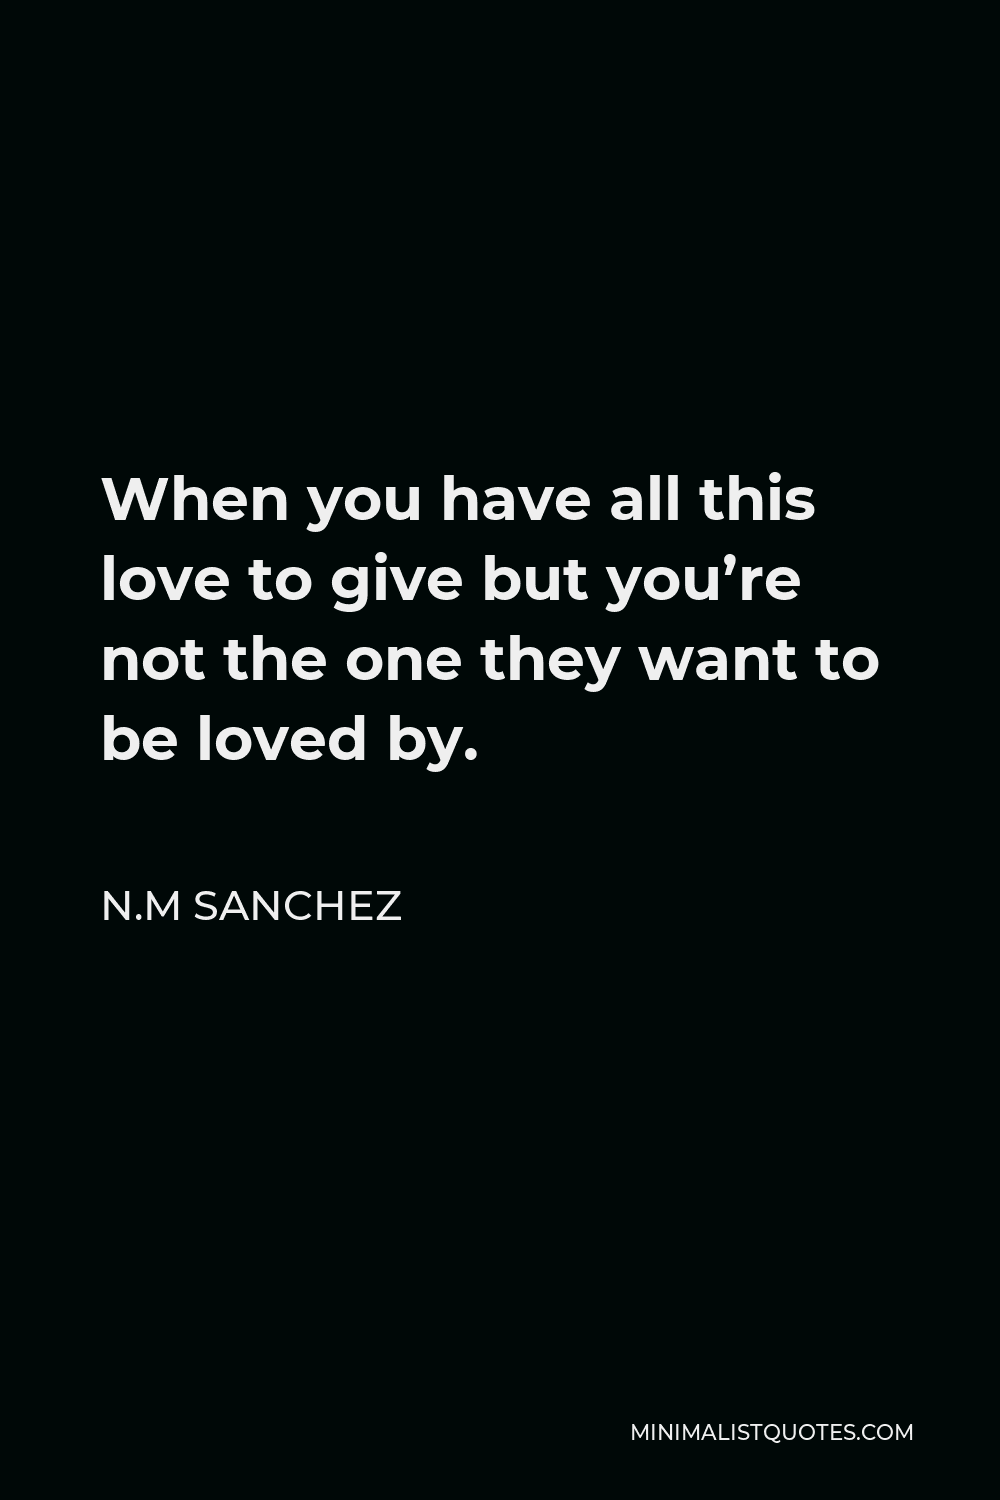 N.M Sanchez Quote - When you have all this love to give but you’re not the one they want to be loved by.